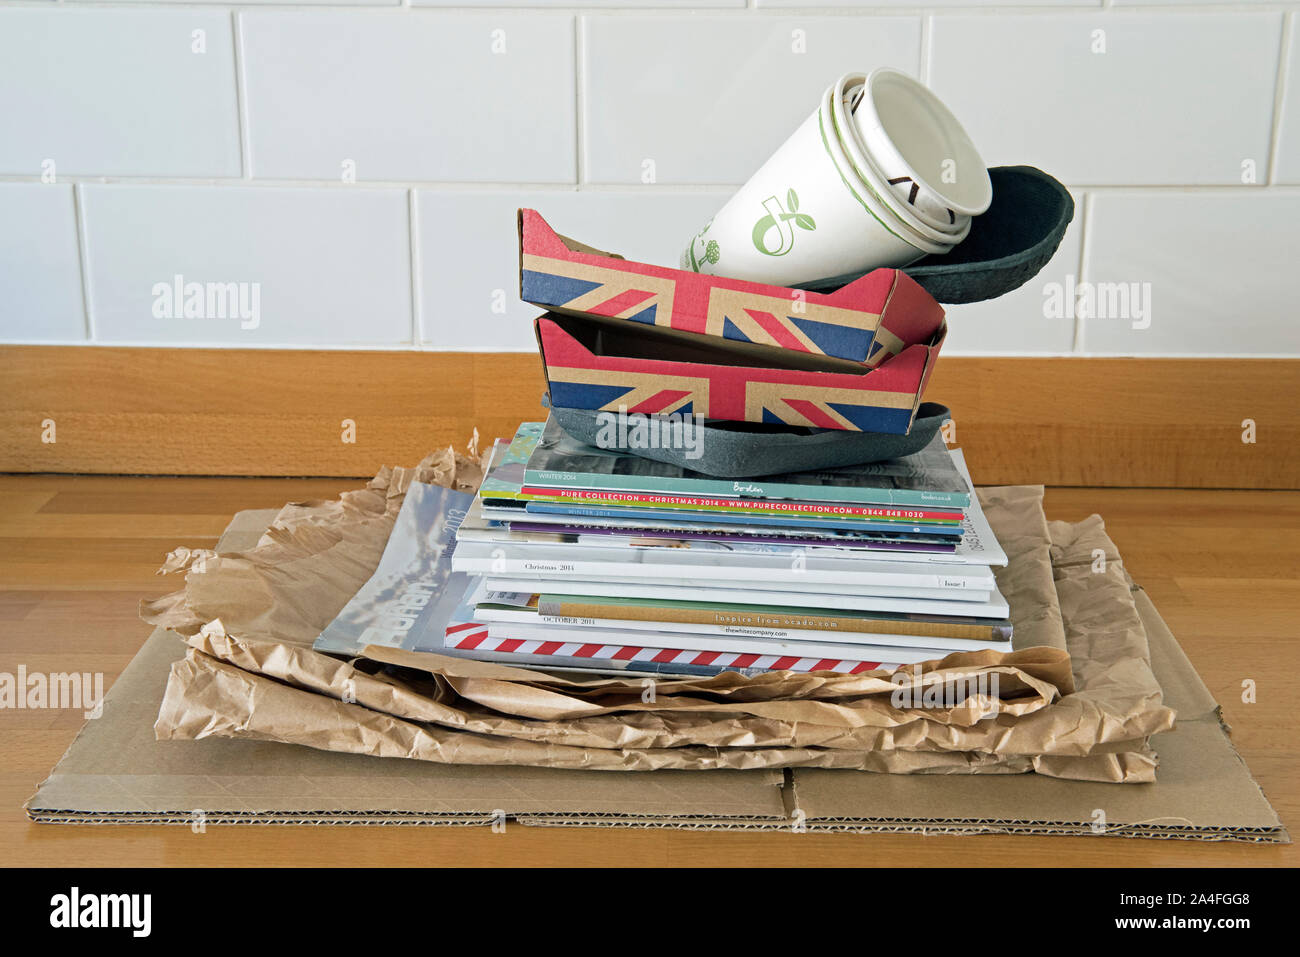 Recyclable household items on kitchen worktop ready for recycling including, paper, cardboard fruit holders and old catalogues.  Zero waste Stock Photo